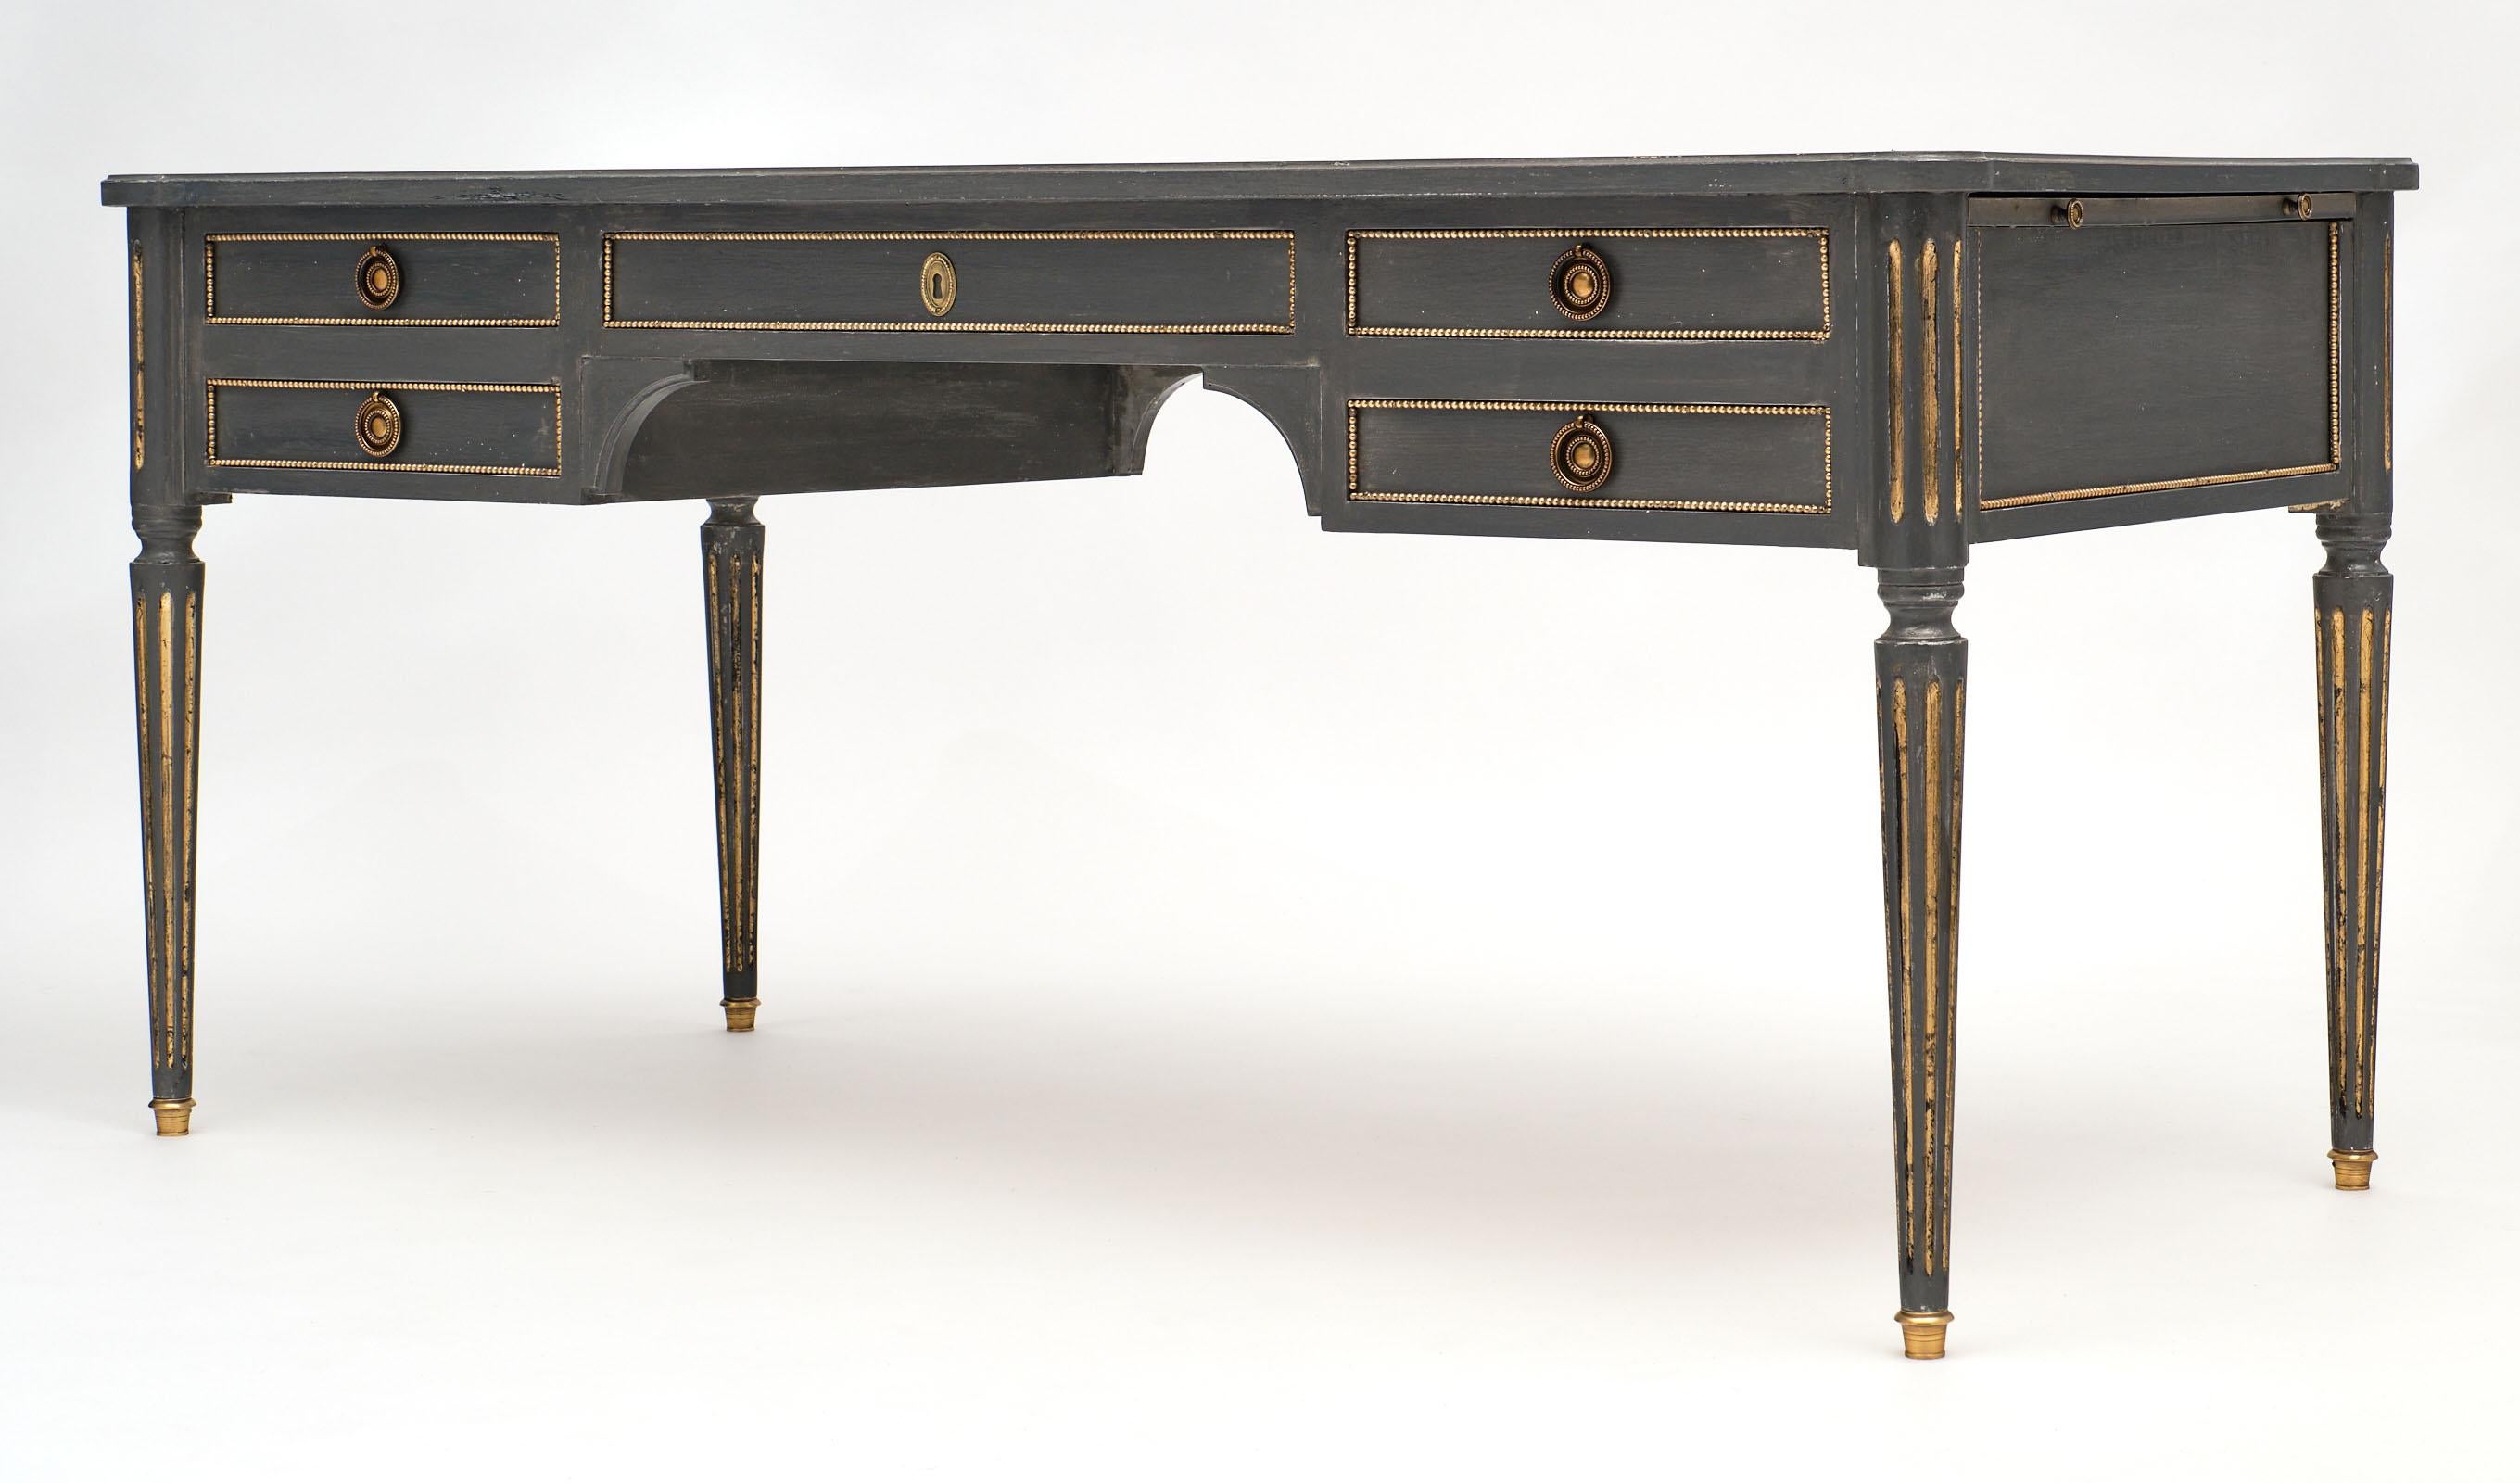 A fine French Antique grand Louis XVI style gray painted desk with important proportions and five dovetailed drawers with their original finely cast bronze hardware. The desk is made of cherrywood and features gilt brass and 24 carat gold leaf